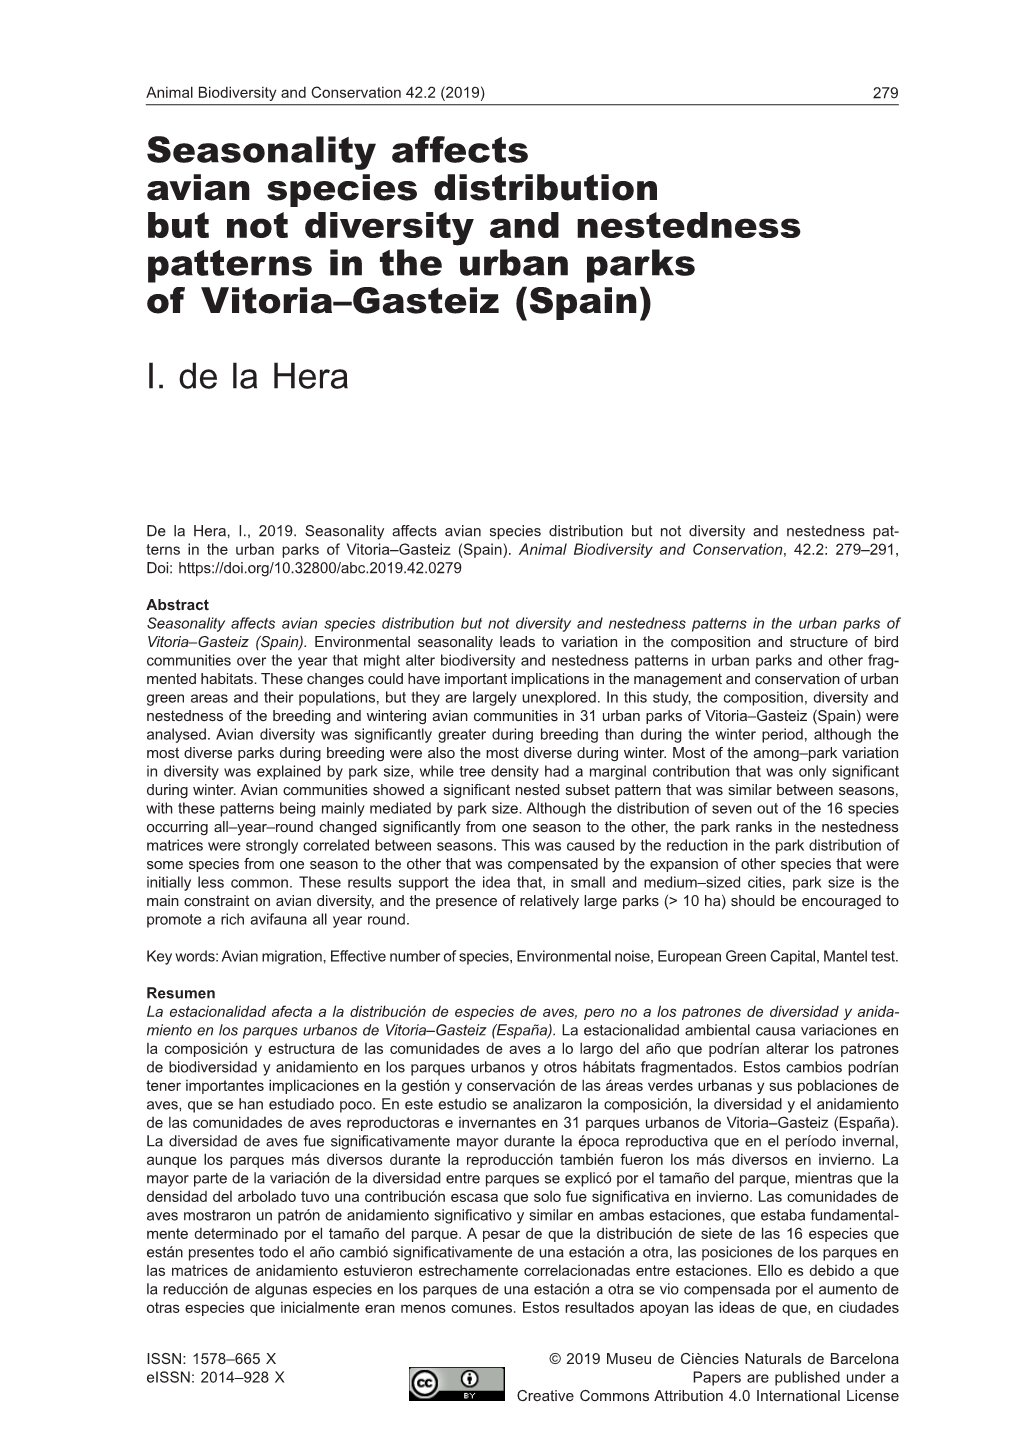 Seasonality Affects Avian Species Distribution but Not Diversity and Nestedness Patterns in the Urban Parks of Vitoria–Gasteiz (Spain)